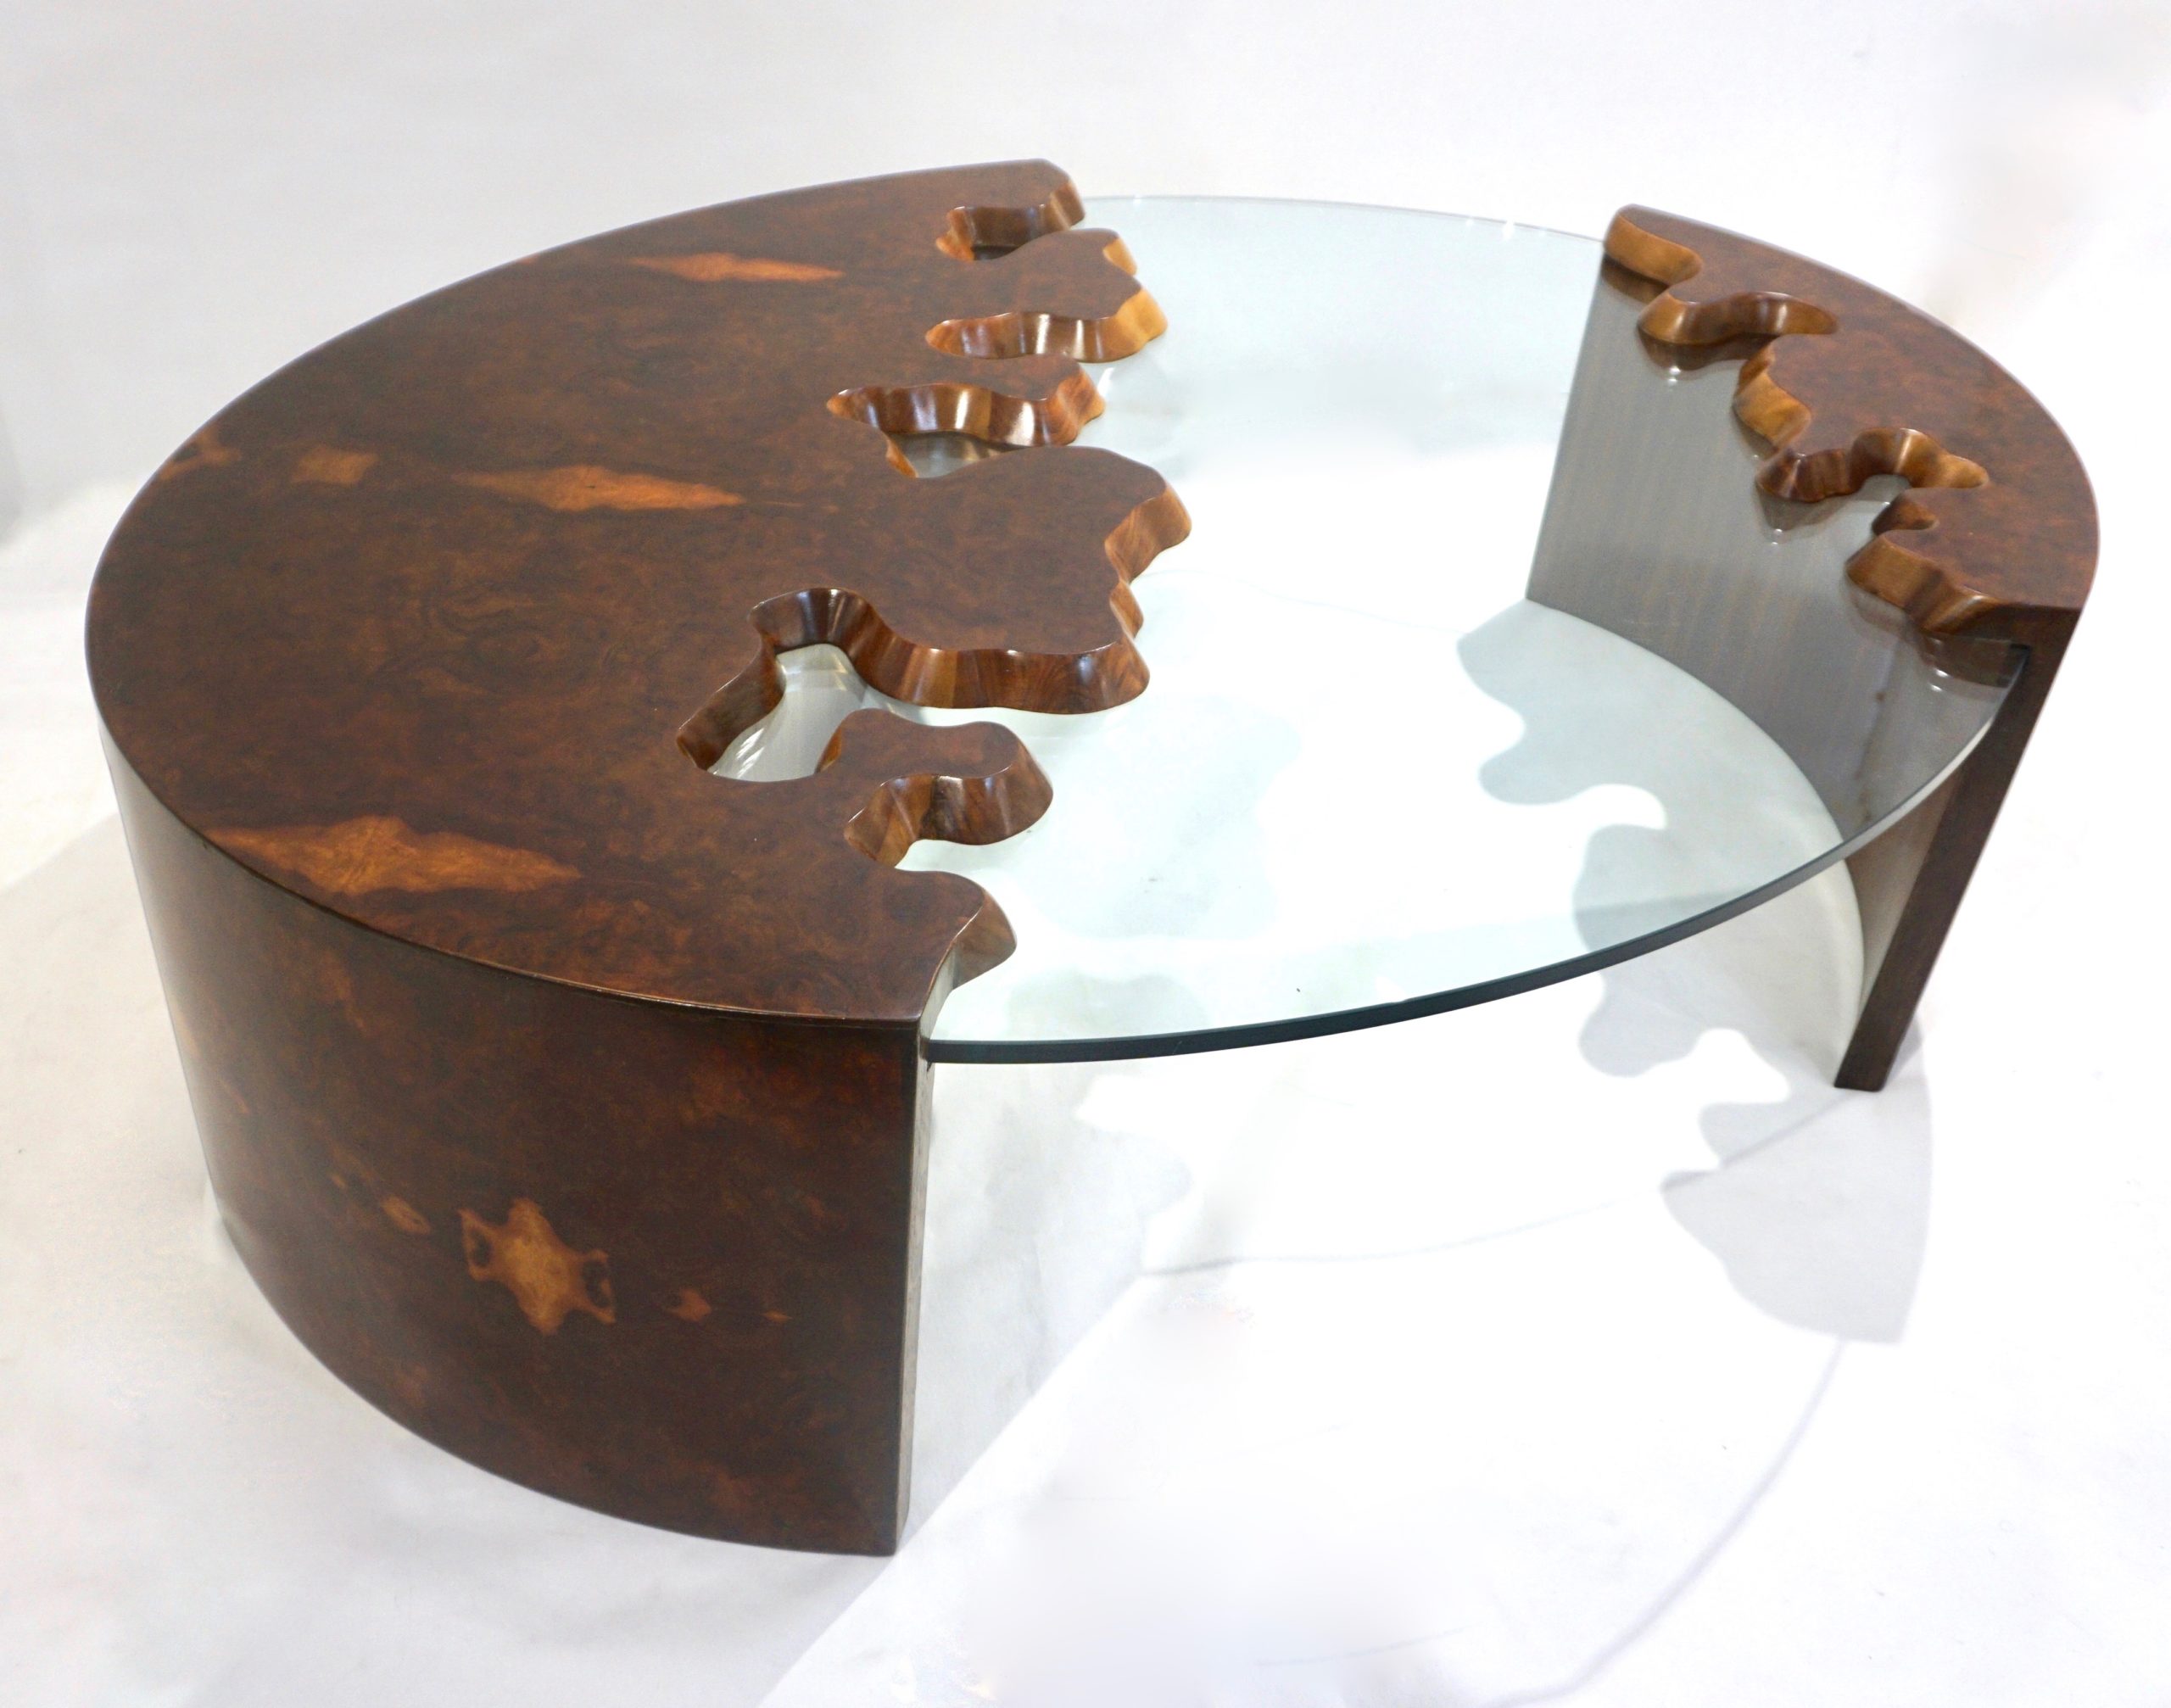 cosulich_interiors_and_antiques_products_new_york_design_Bespoke_1980_Italian_Organic_Walnut_Veneer_Glass_Oval_Coffee_Table_top_side-scaled-2